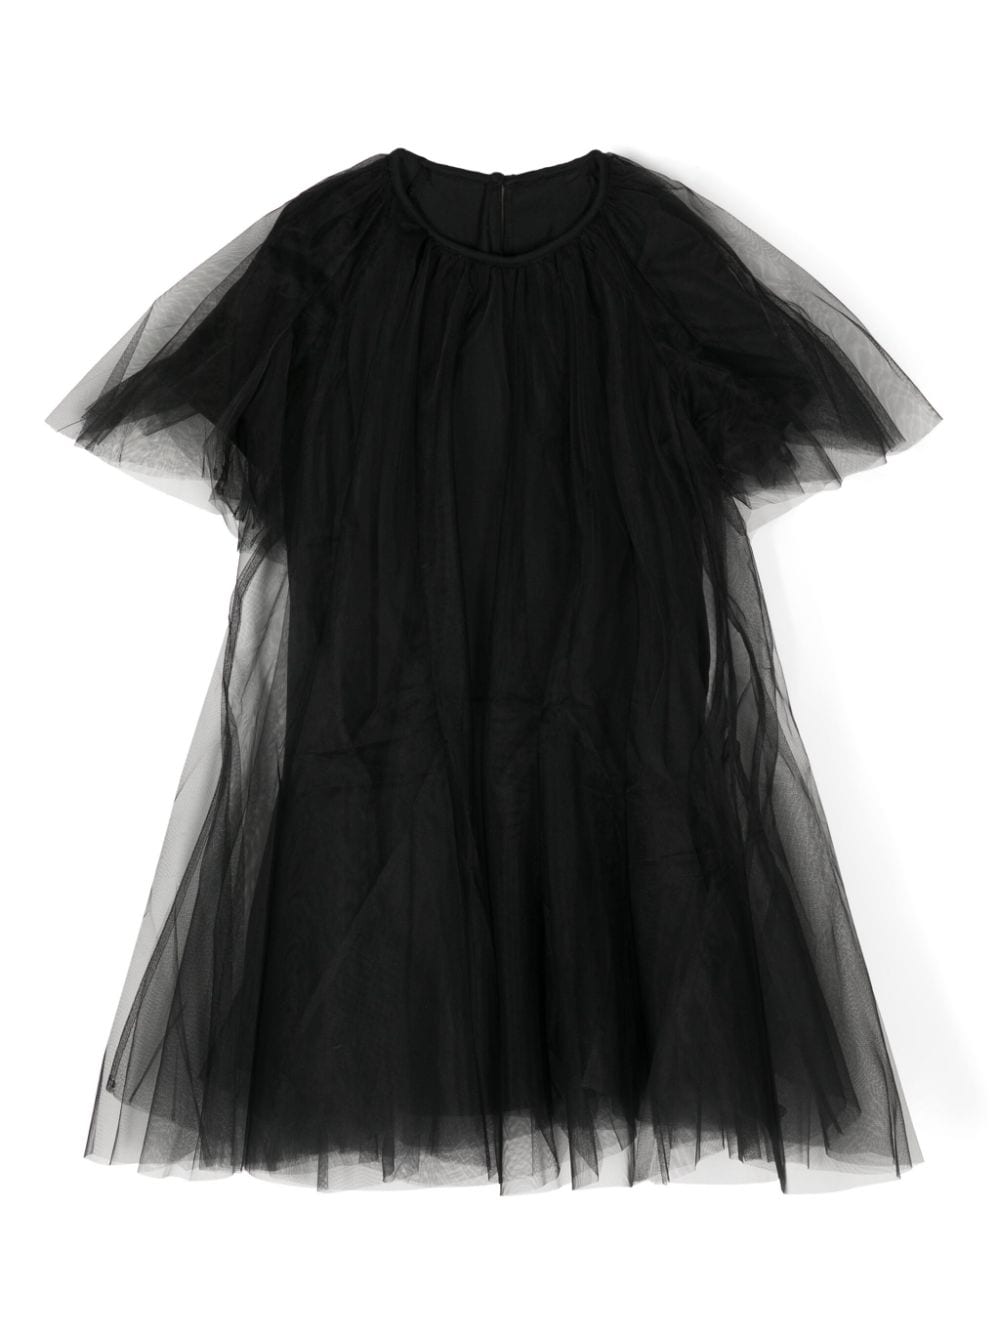 jnby by JNBY layered tulle dress - Black von jnby by JNBY